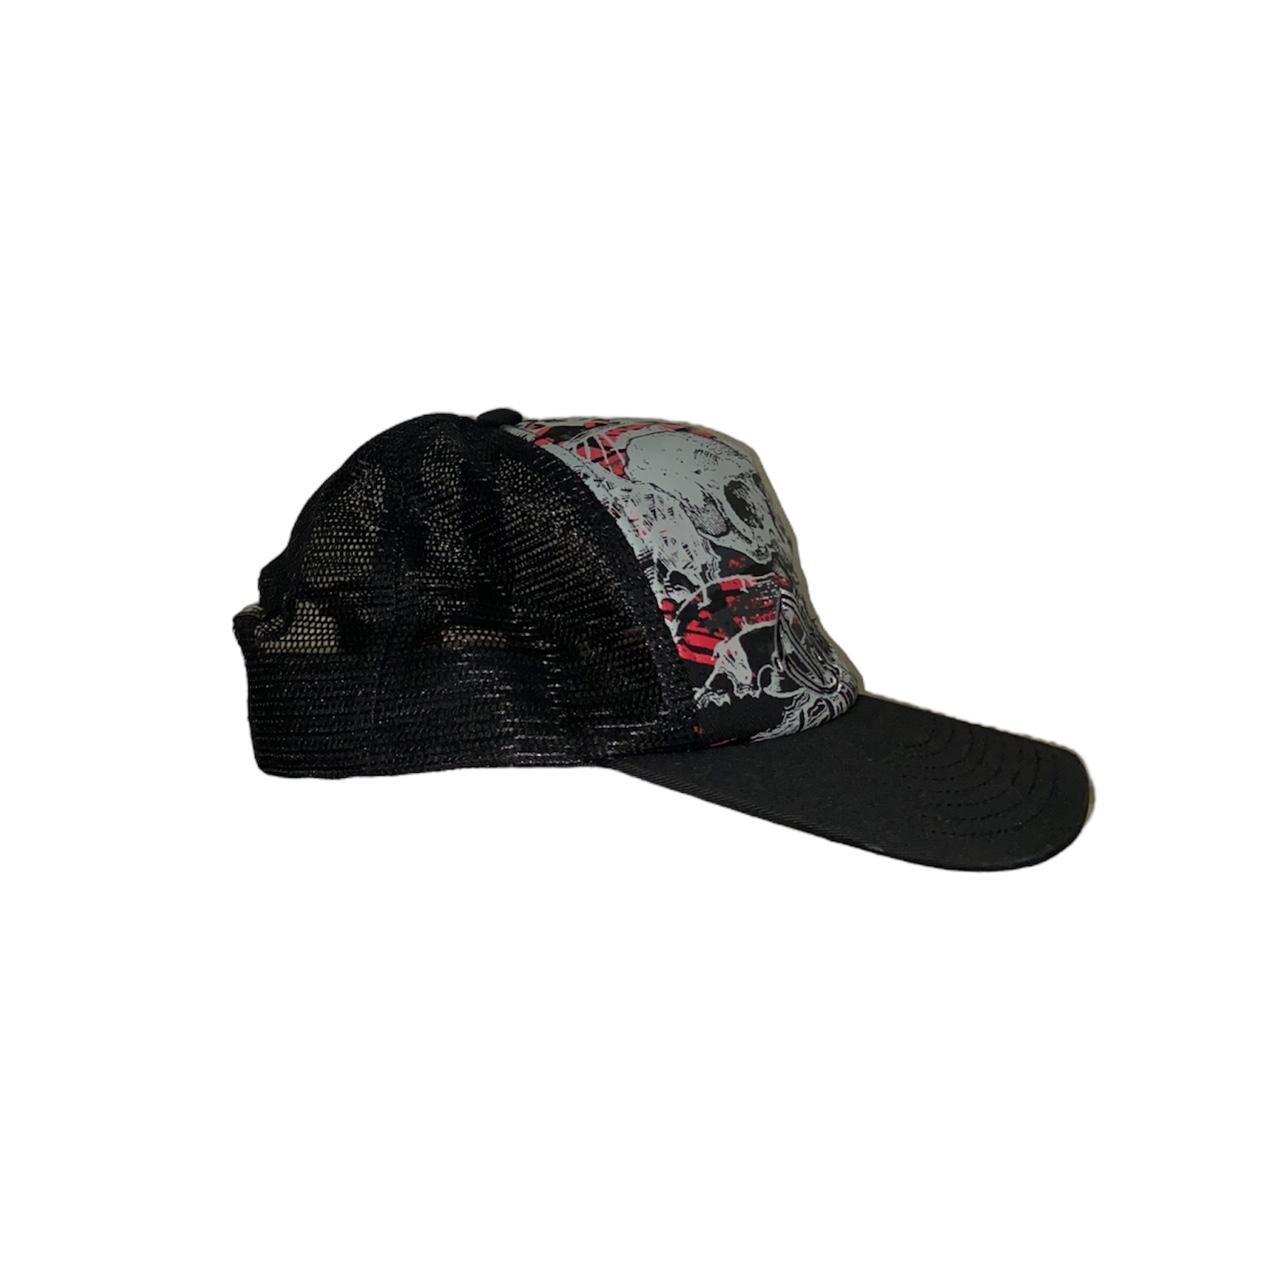 Quiksilver Men's Black and Red Hat (2)